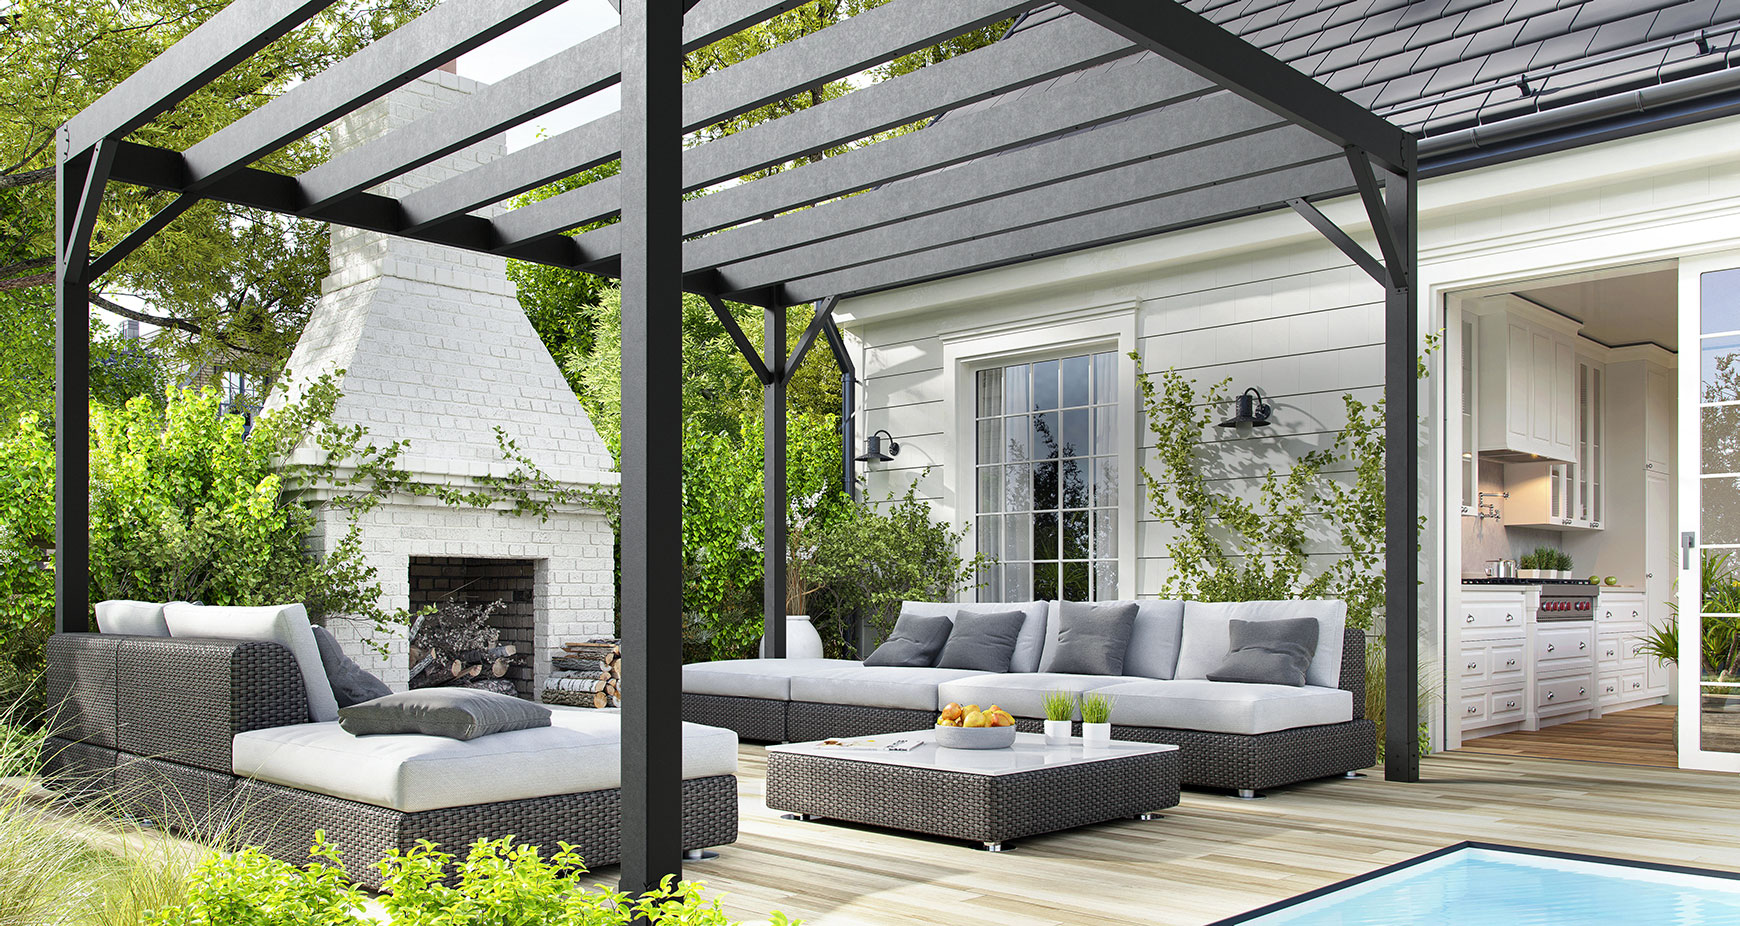 Backyard setup featuring a steel pergola over cozy couches next to a fireplace.